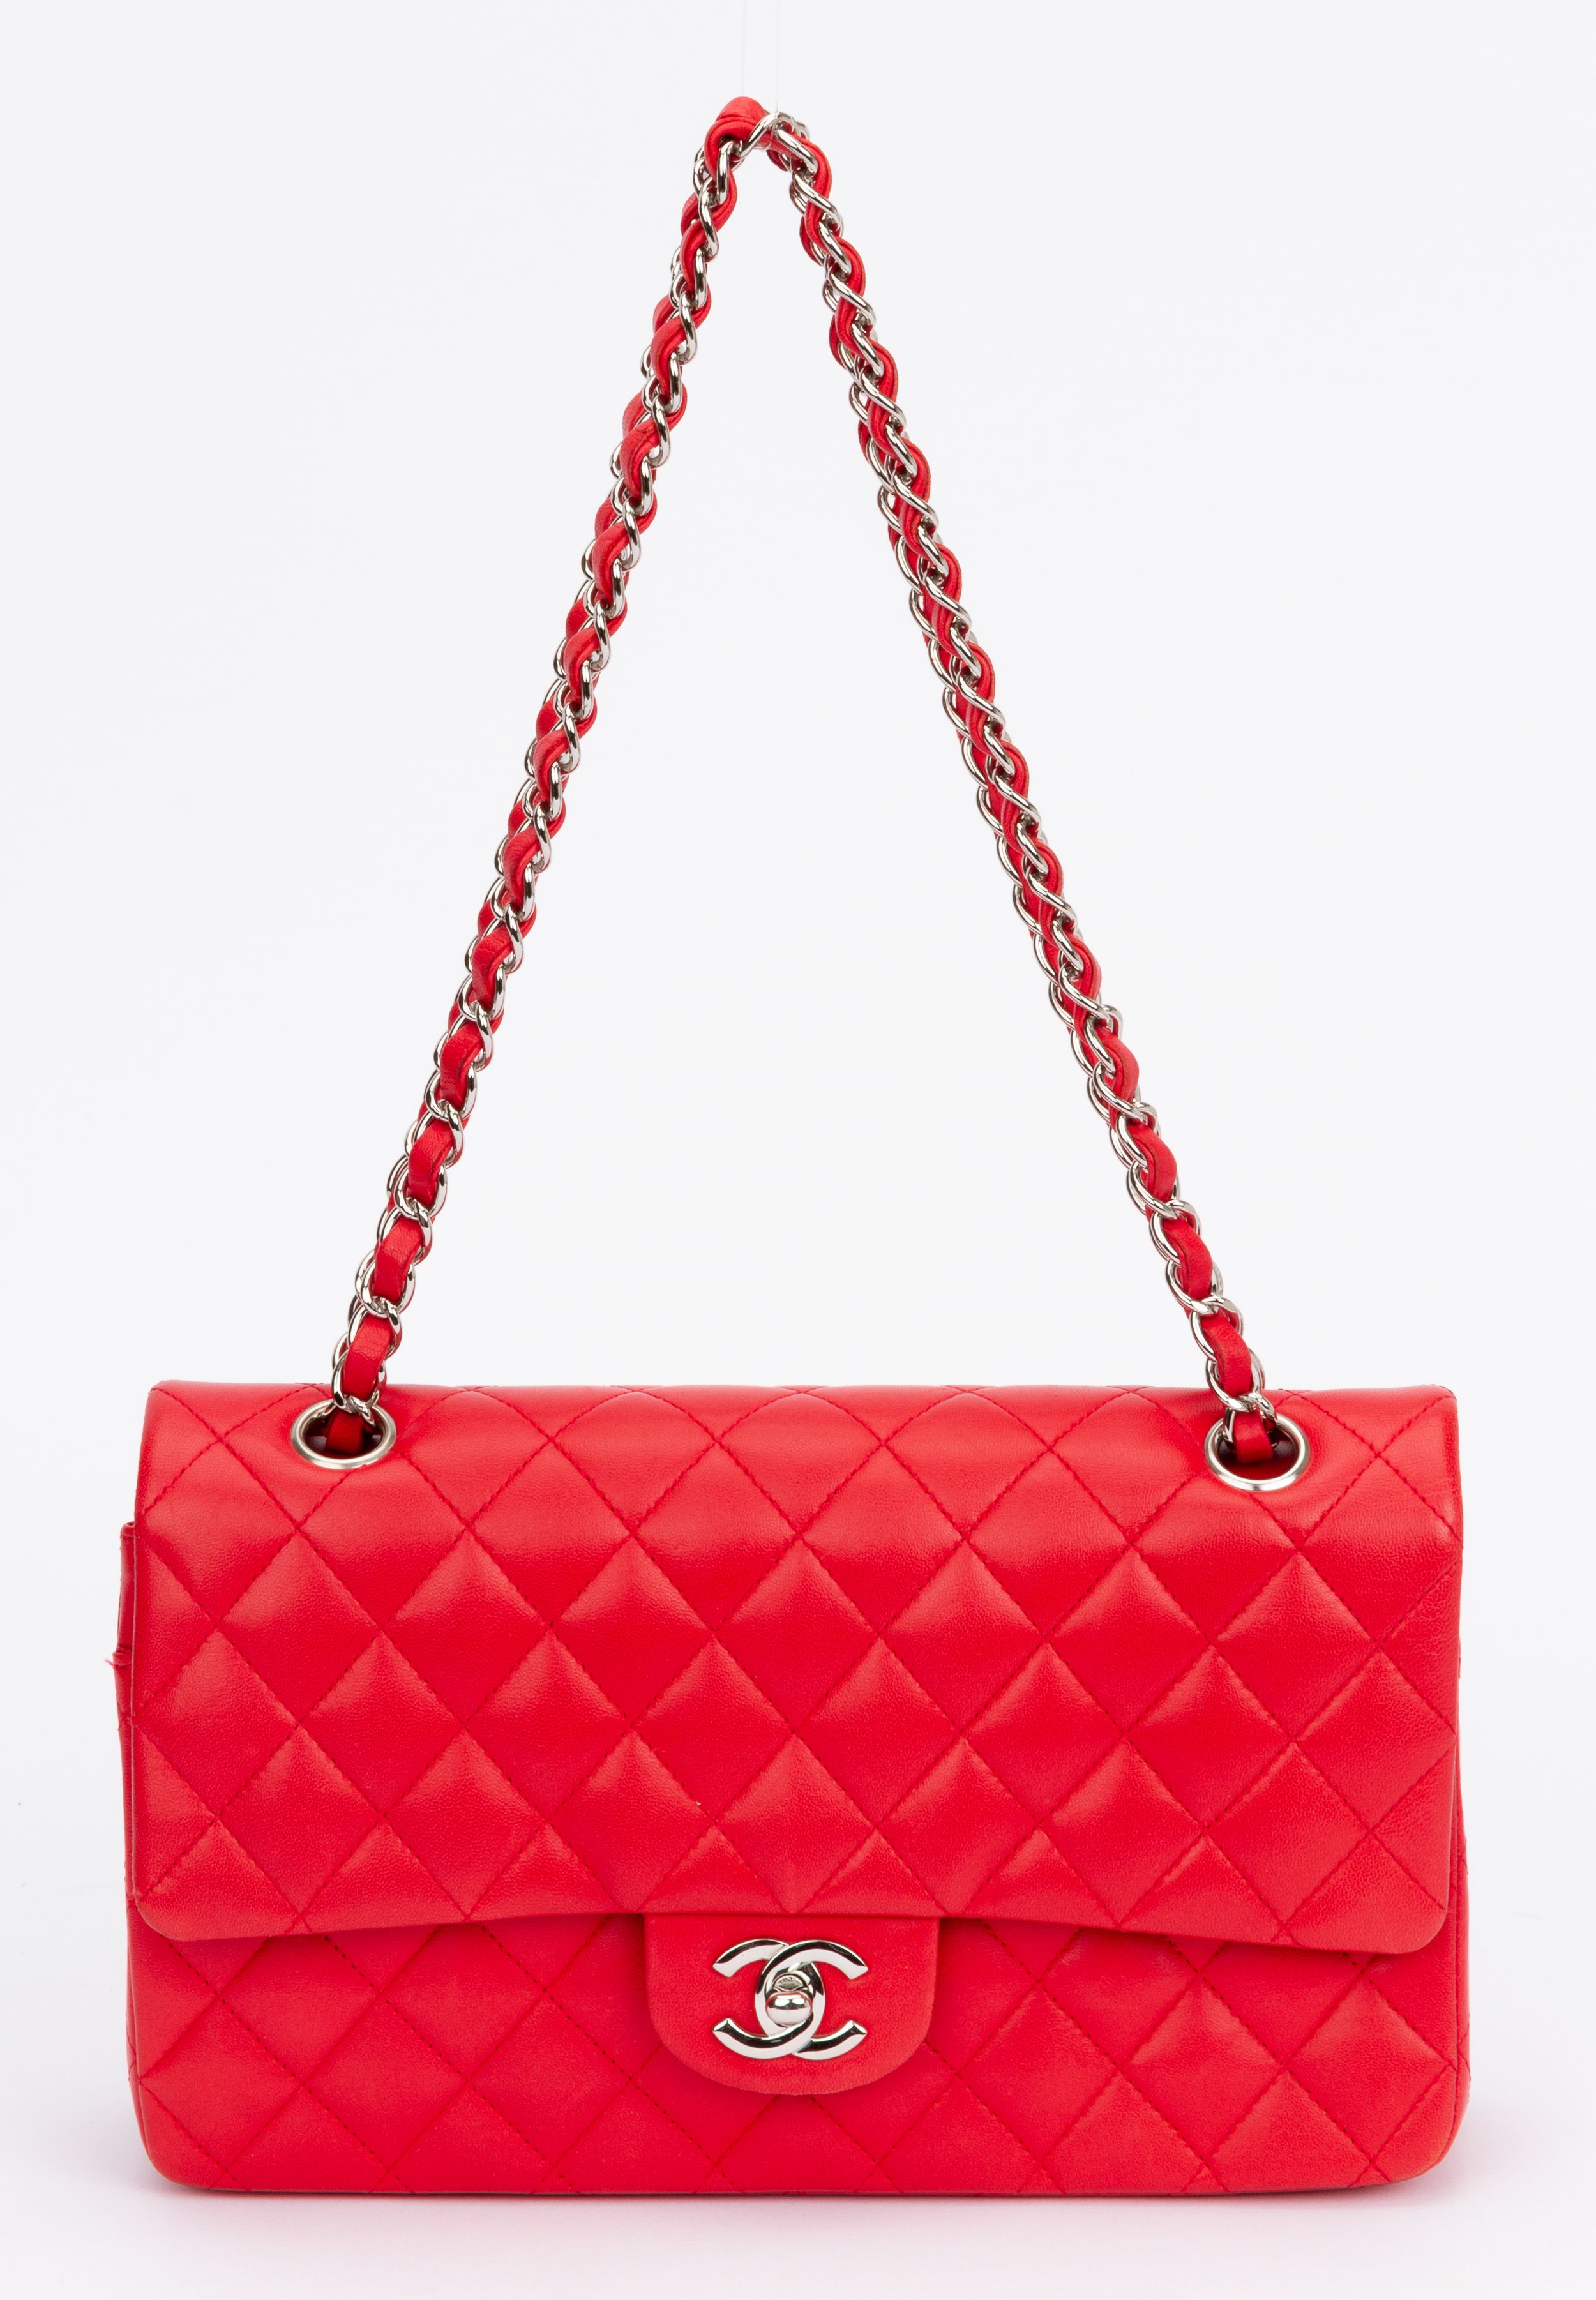 Chanel Bright Red 10 Double Flap Bag~P77660504